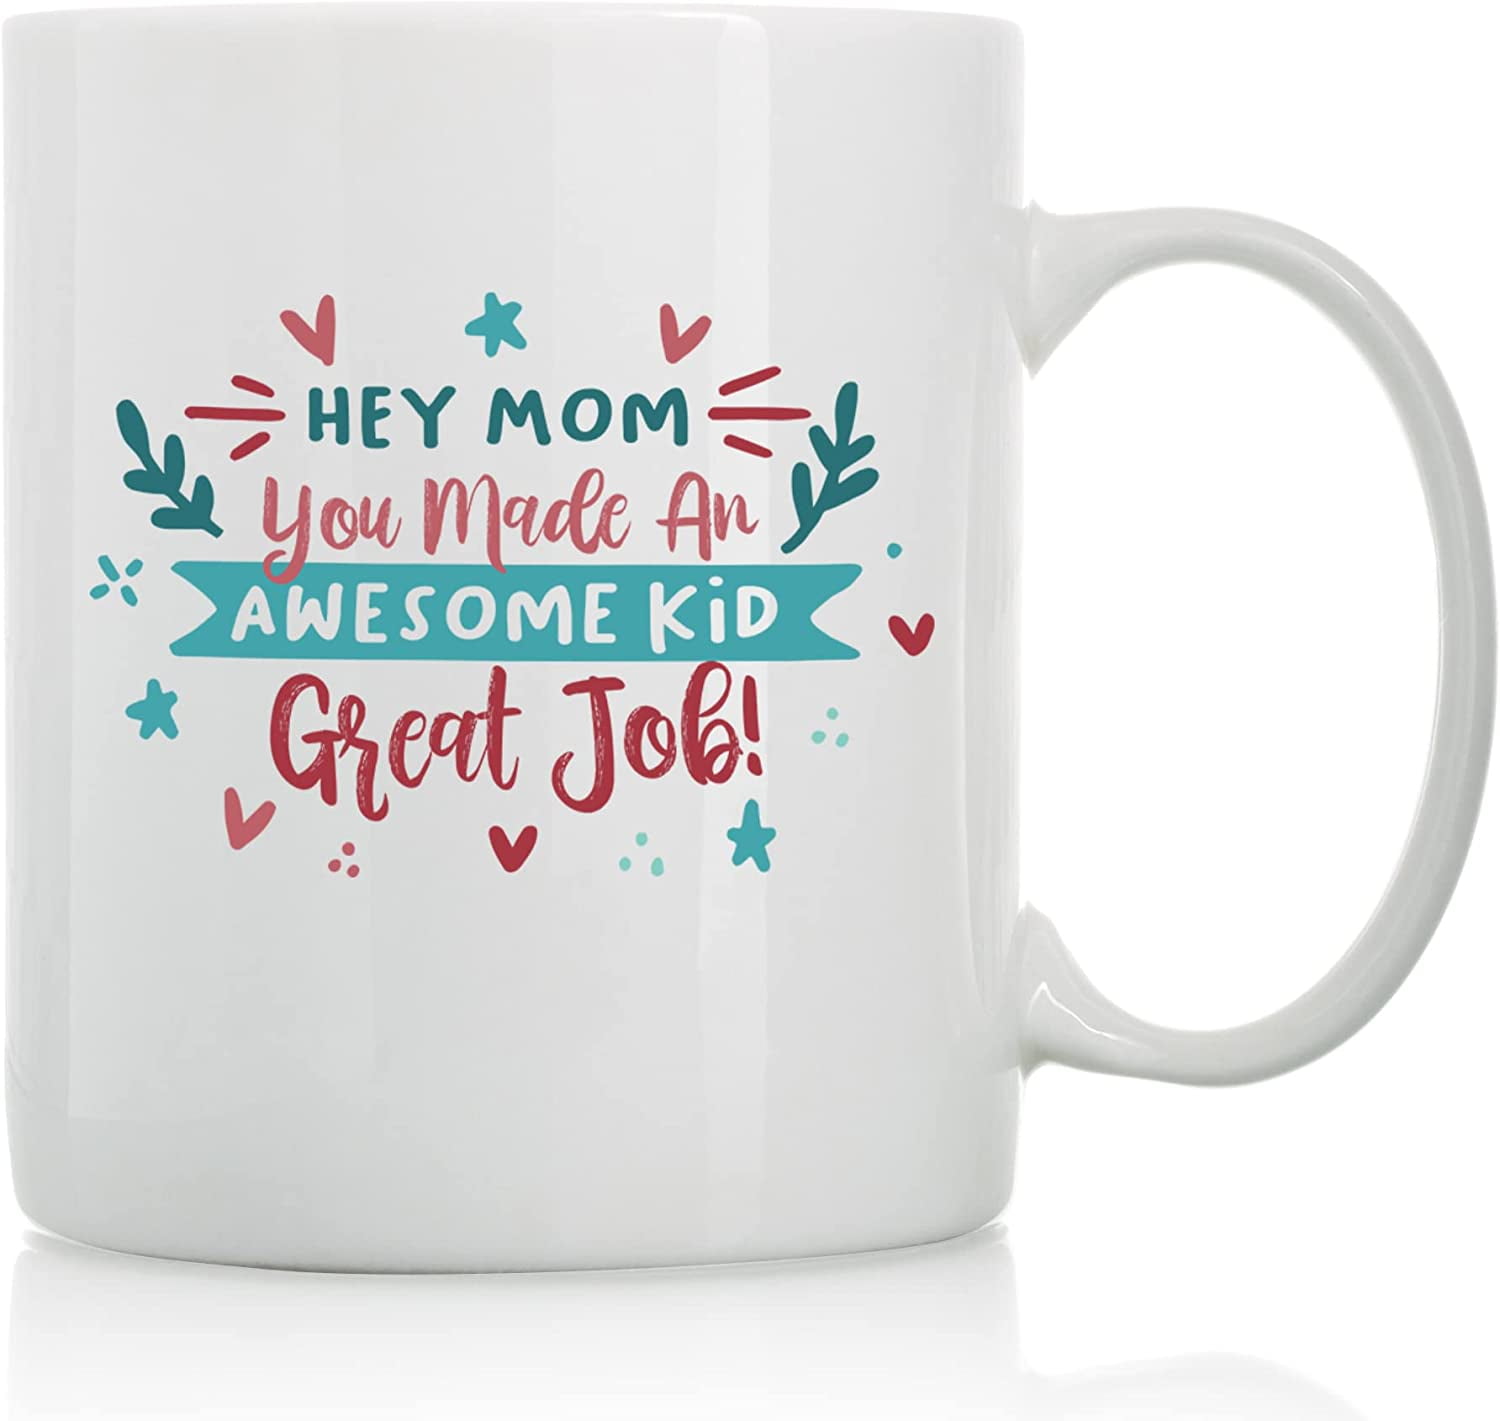 Watermelon Heads Mother's Day Mug for Mom - Best Mom, Wife, Love of My Life. 15oz Tea Cup Coffee Mug Gift from Husband. Birthday, Anniversary. Happy